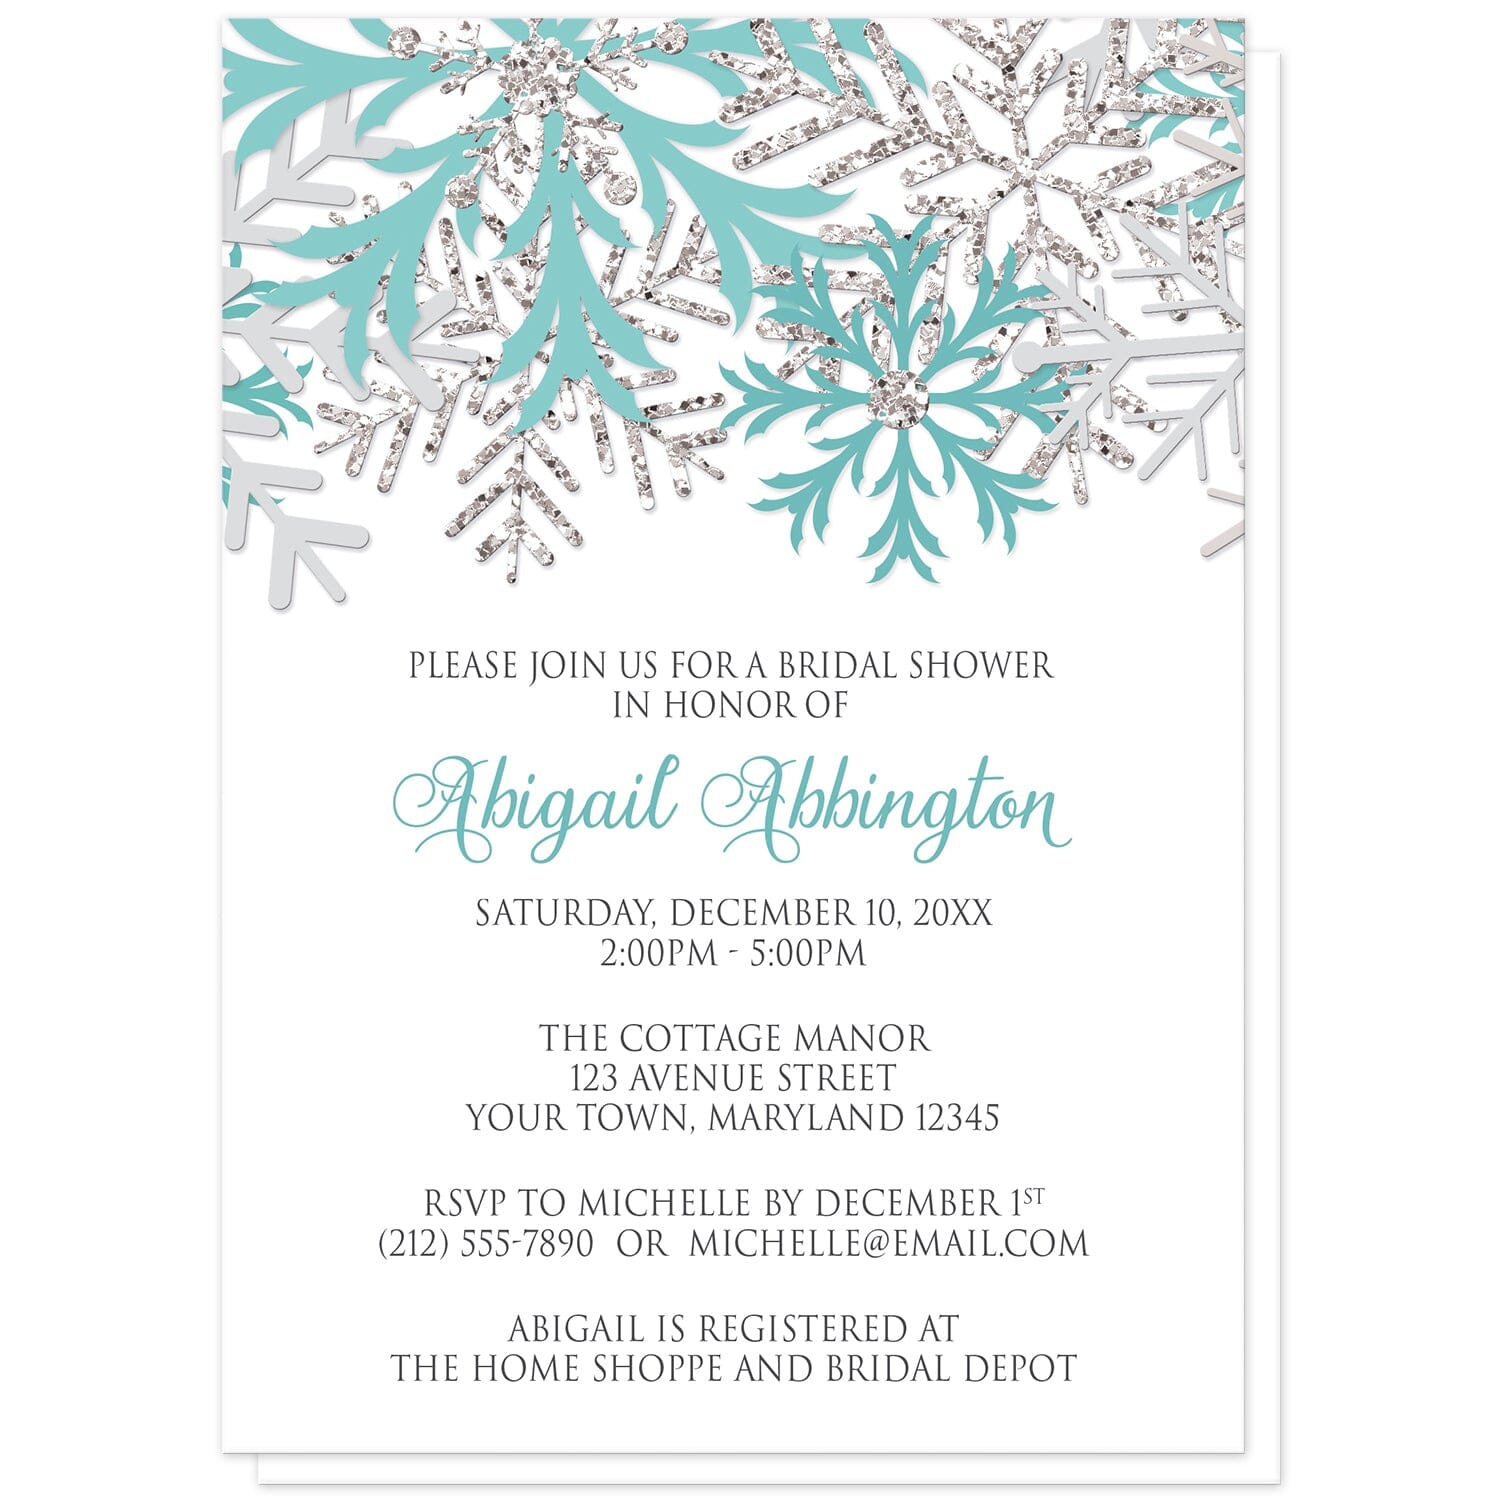 Winter Teal Silver Snowflake Bridal Shower Invitations at Artistically Invited. Beautiful winter teal silver snowflake bridal shower invitations designed with teal, light teal, silver-colored glitter-illustrated, and light gray snowflakes along the top over a white background. Your personalized bridal shower celebration details are custom printed in teal and gray below the pretty snowflakes.